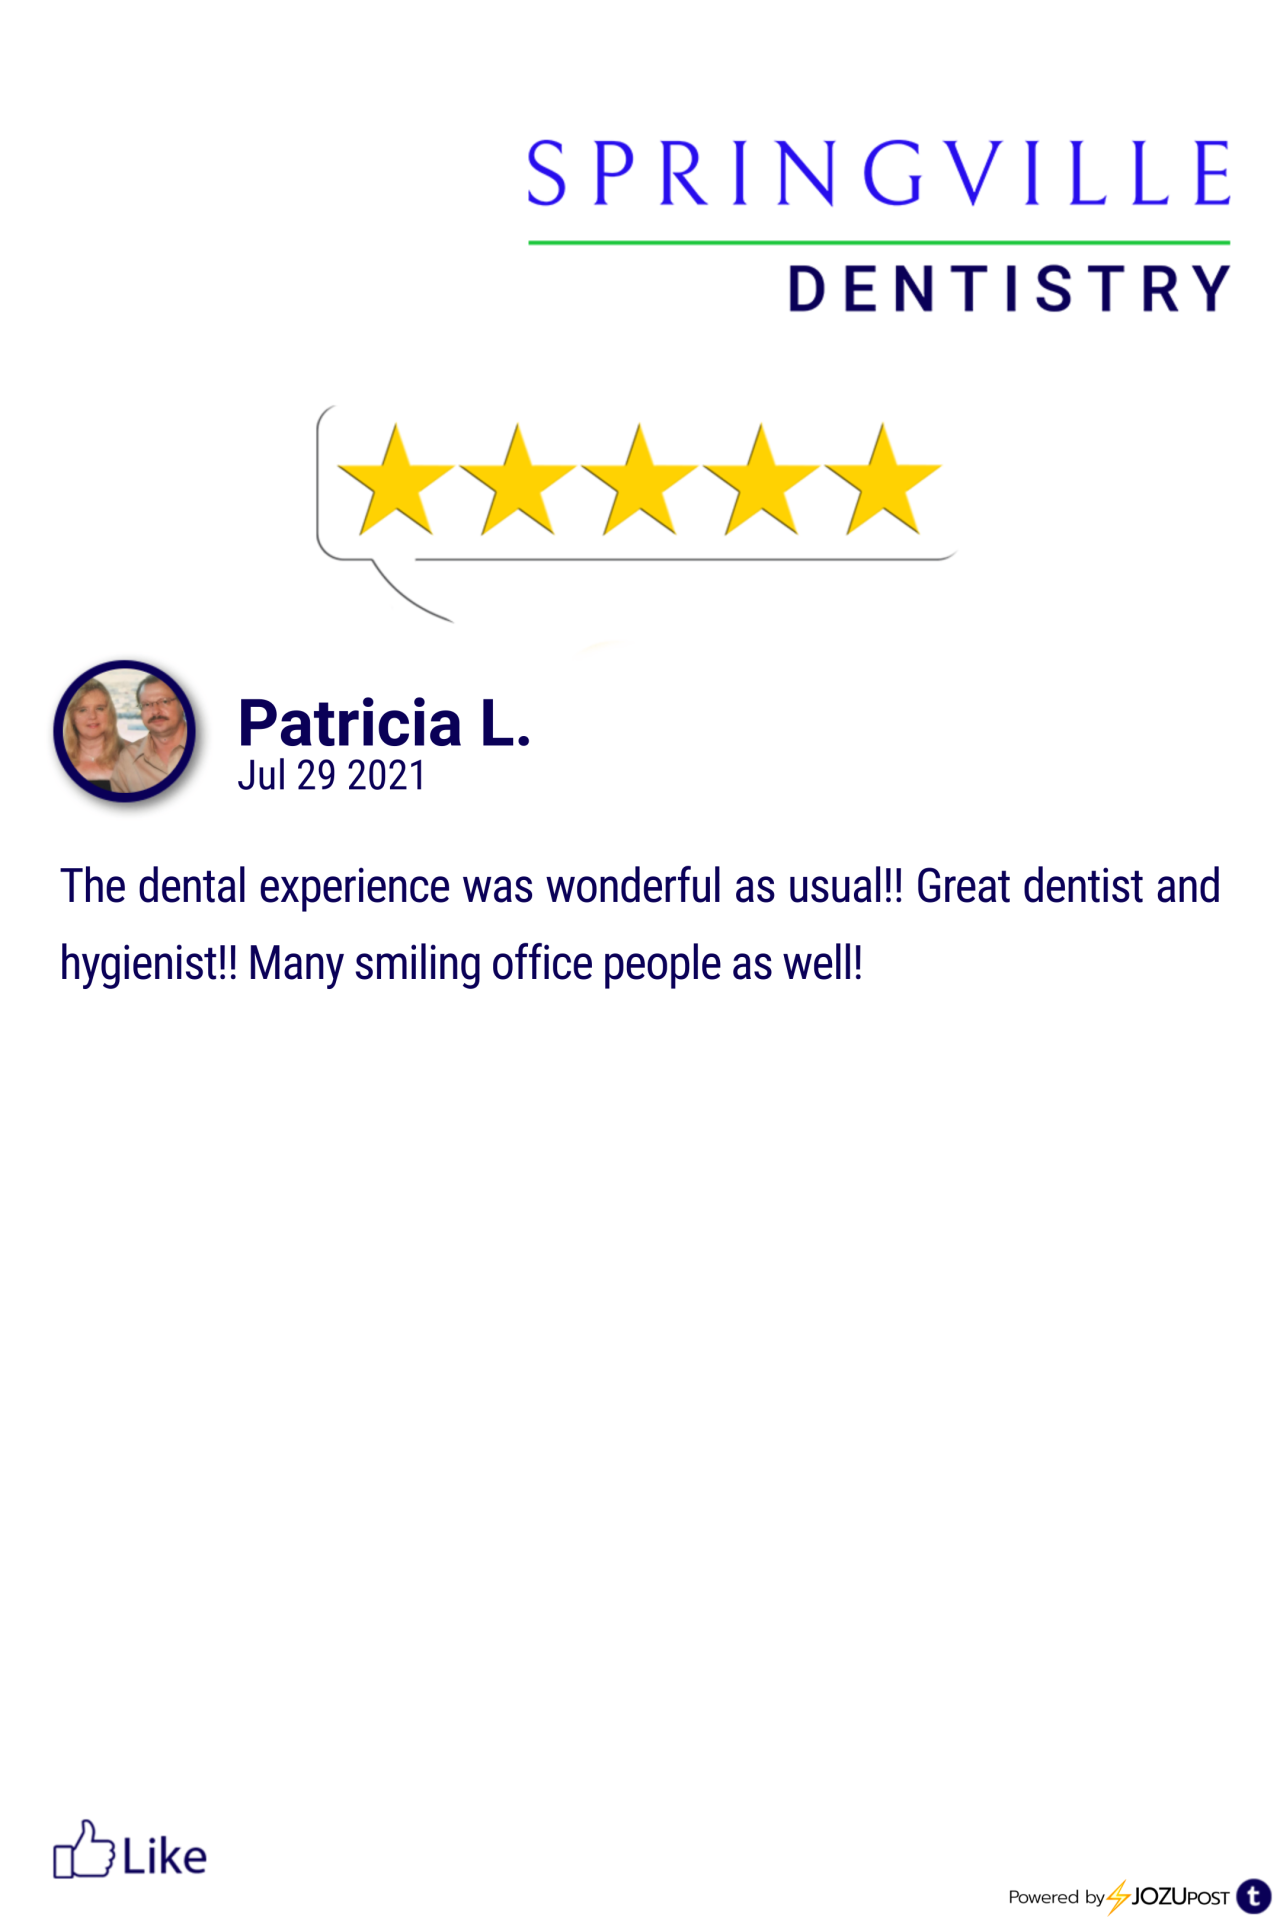 We appreciate our patients!
Here is our latest Five-Star Review from Patricia L. We love to recognize those patients that take the time to fill out a review and let us know how we are doing.
Here is what Patricia L. had to say: “The dental experience...